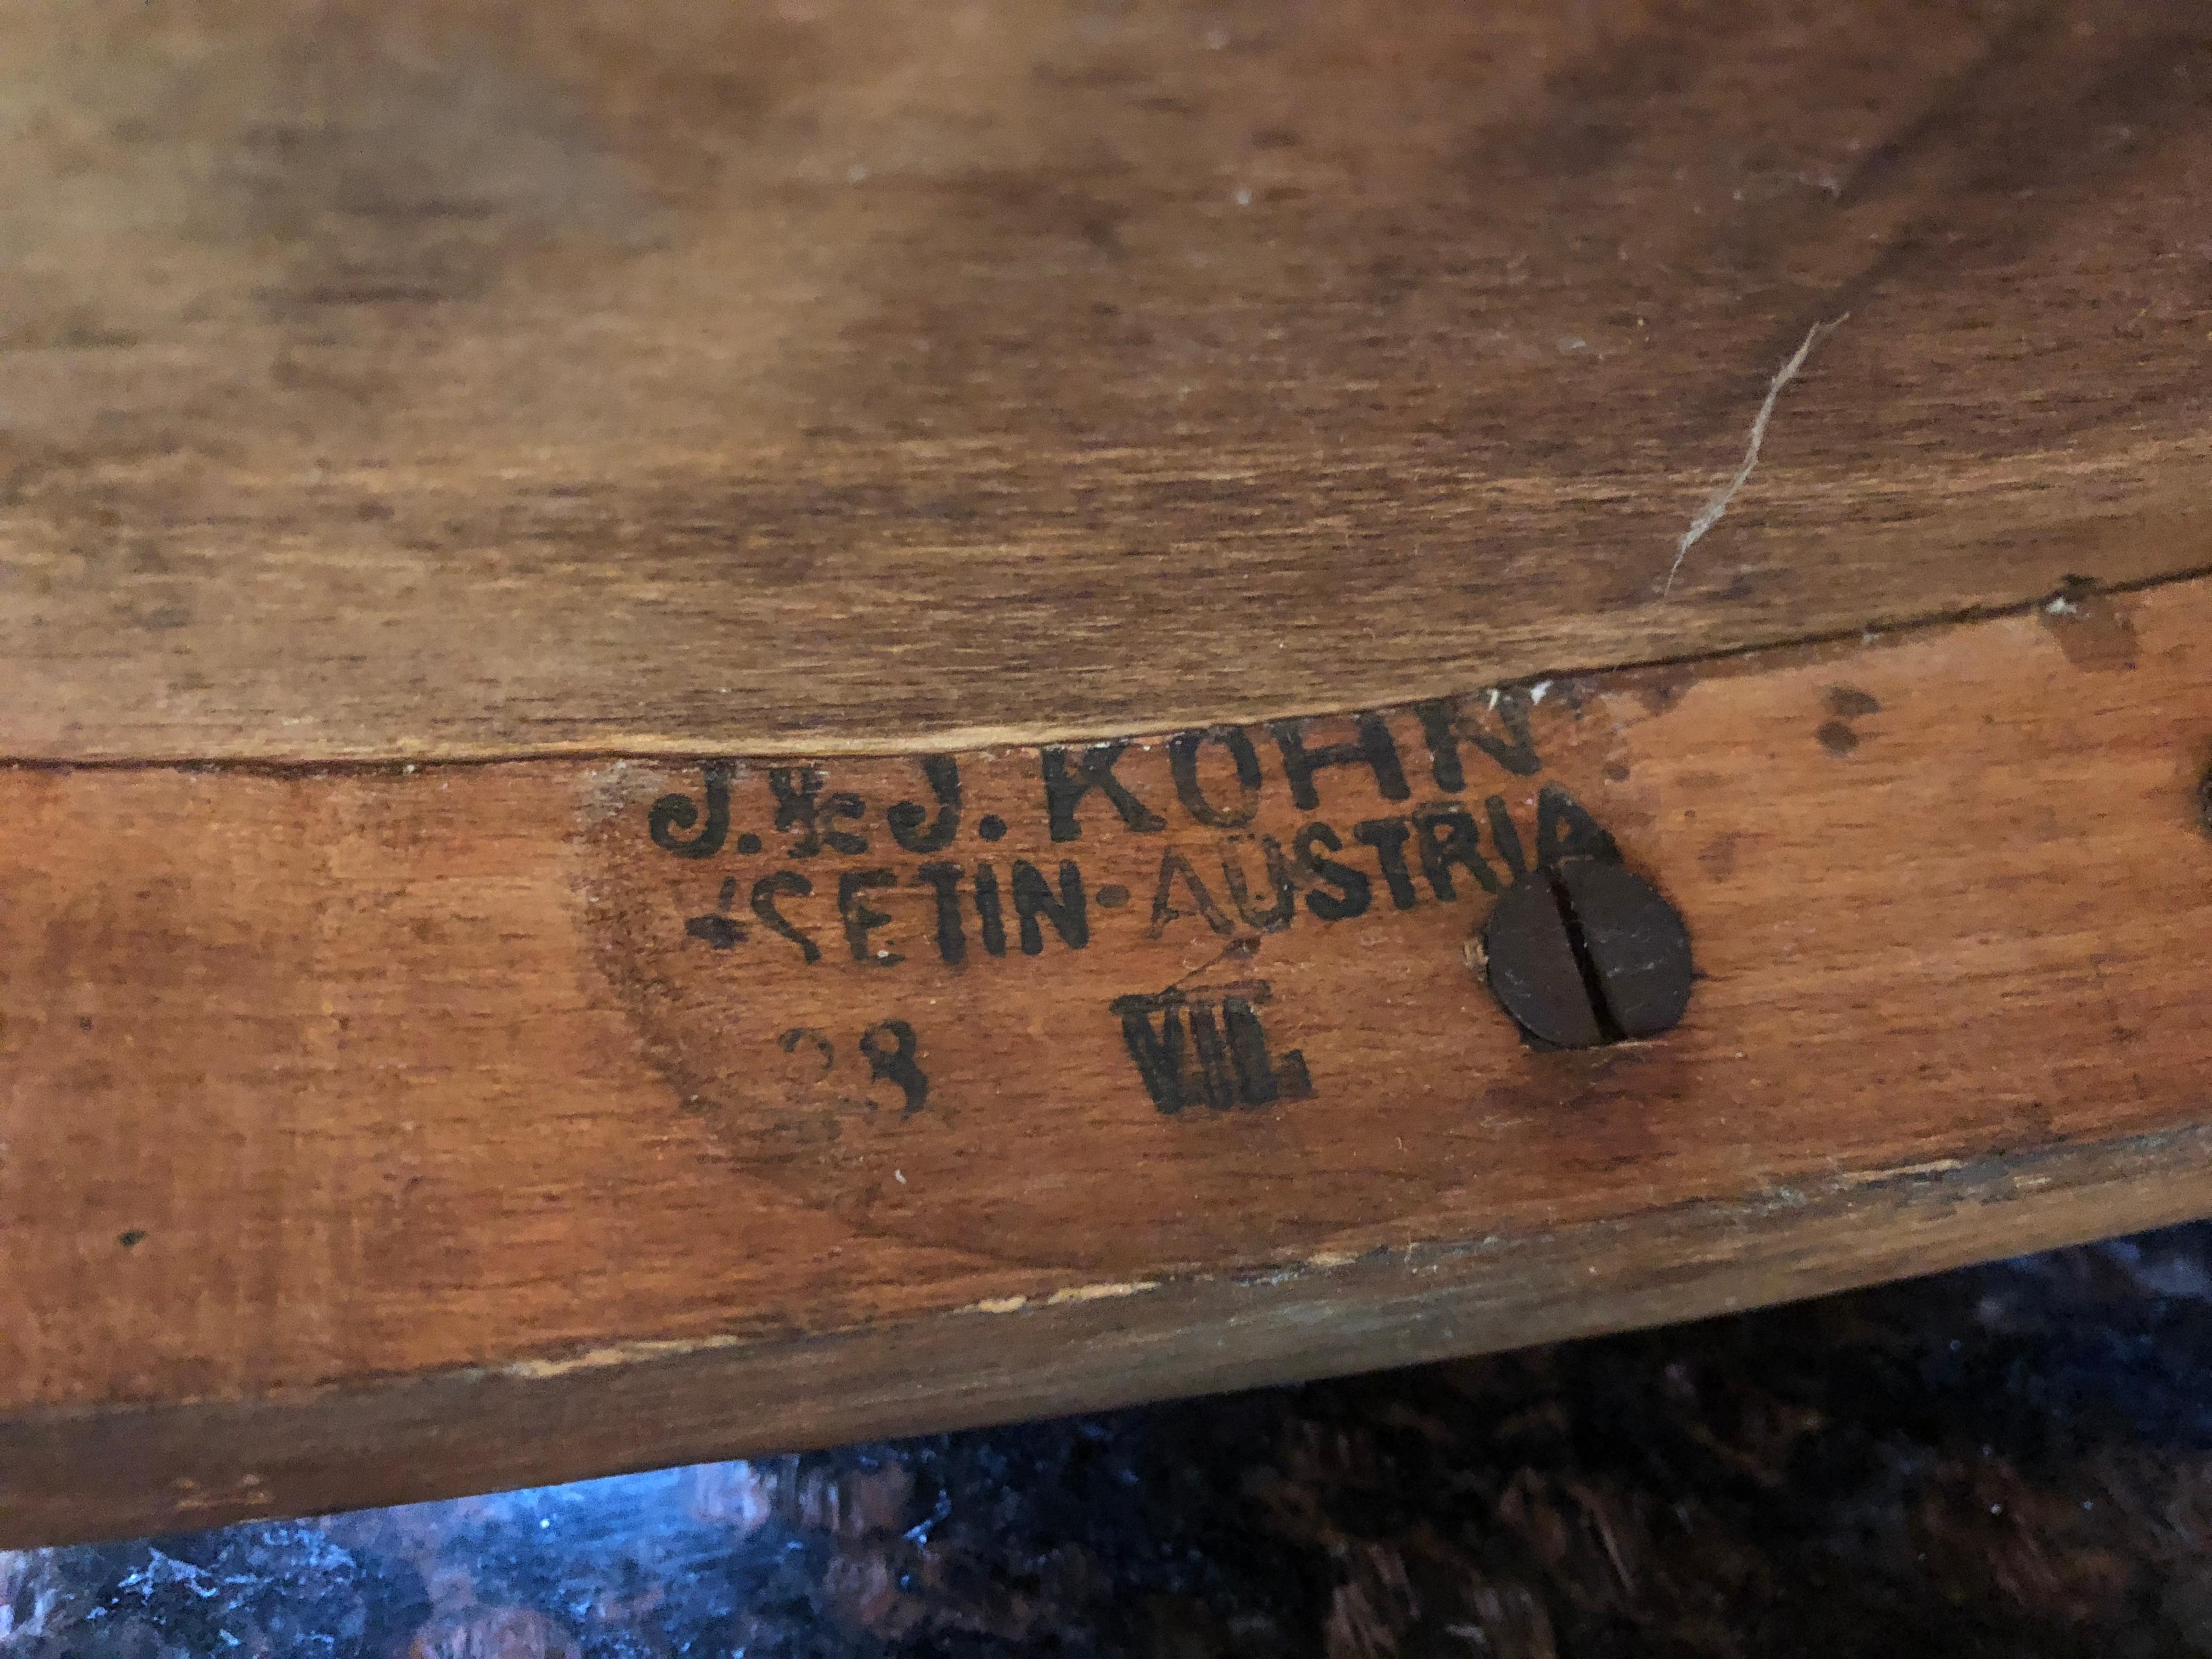 Unusual early Kohn chair paper label Vienna Austria. Unusual chair.

Jacob and Josef Kohn and their descendents influenced Classic furniture design from the Jugendstil and wiener werstatte styles. The Kohn family firm was founded in 1850, as a